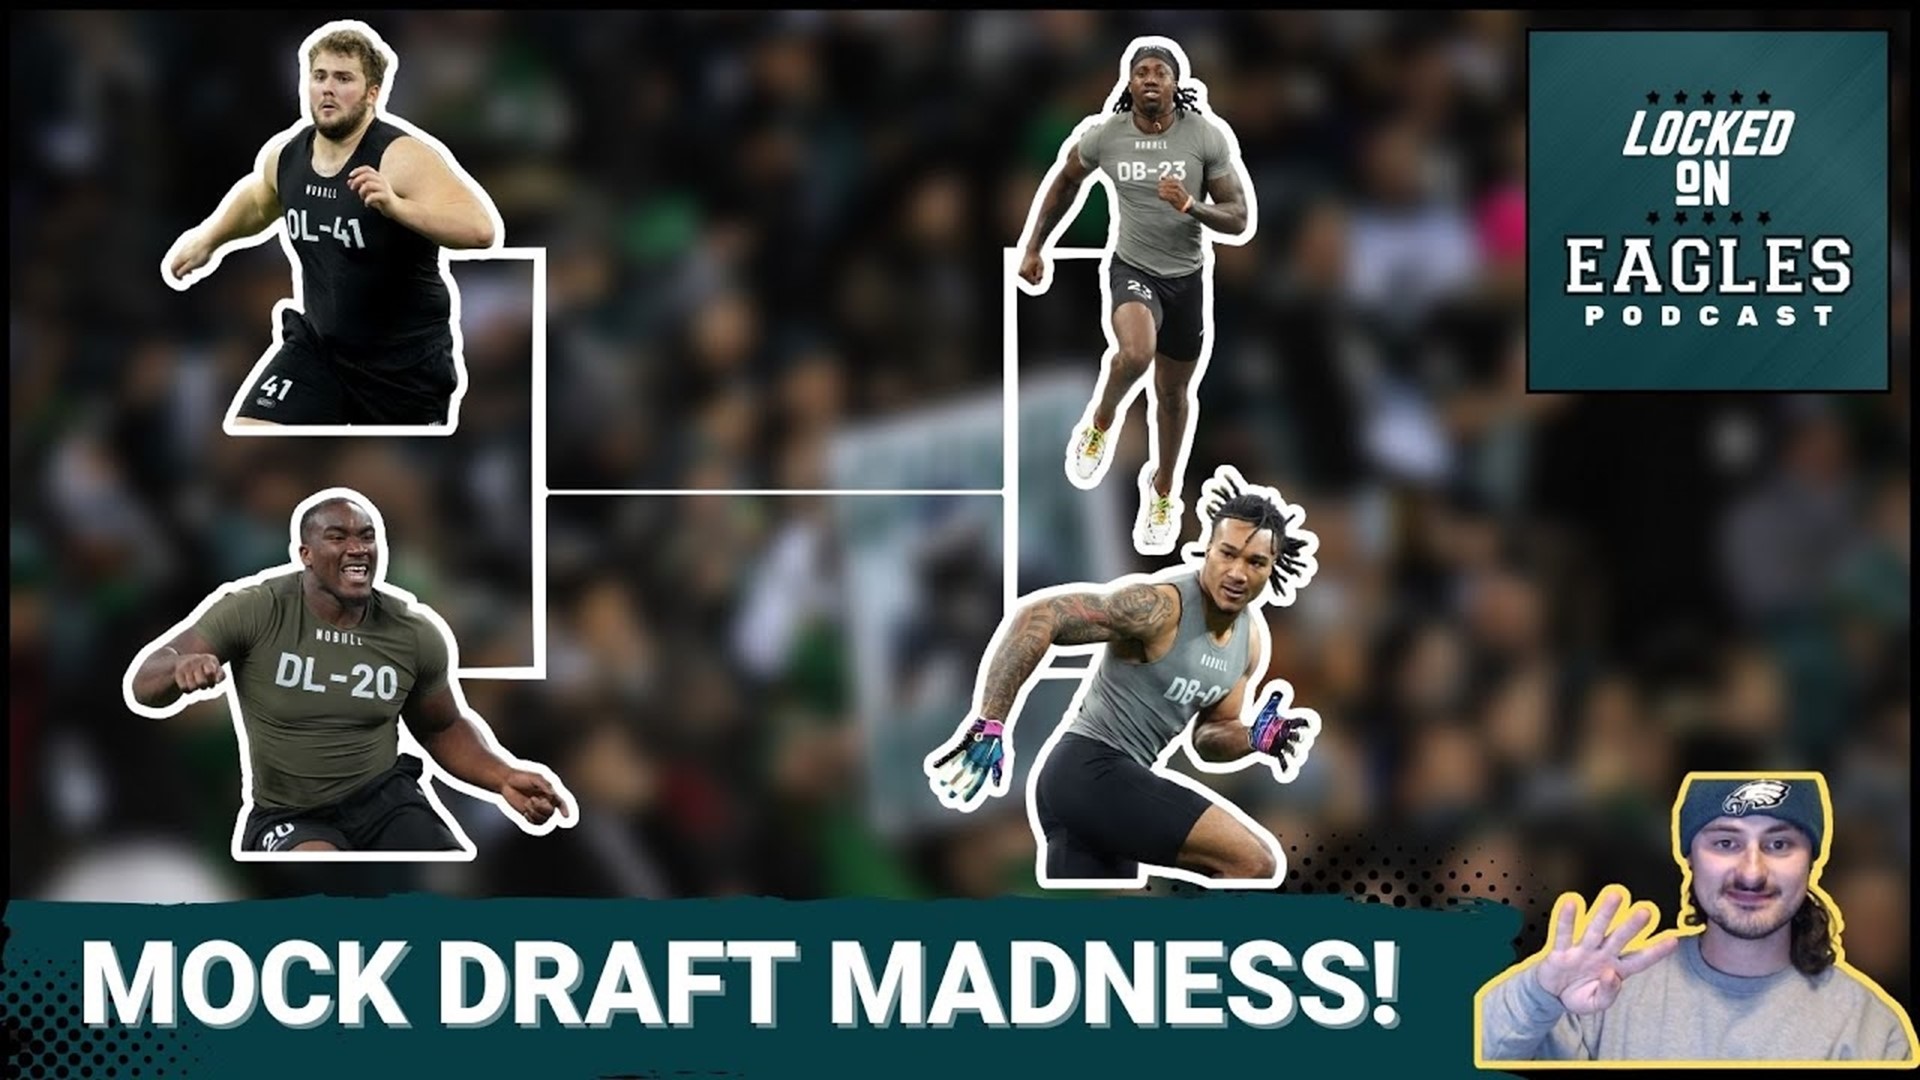 It is Mock Draft Monday at Locked on Eagles with Four-Two Round Mock Drafts in the spirit of March Madness Final 4!